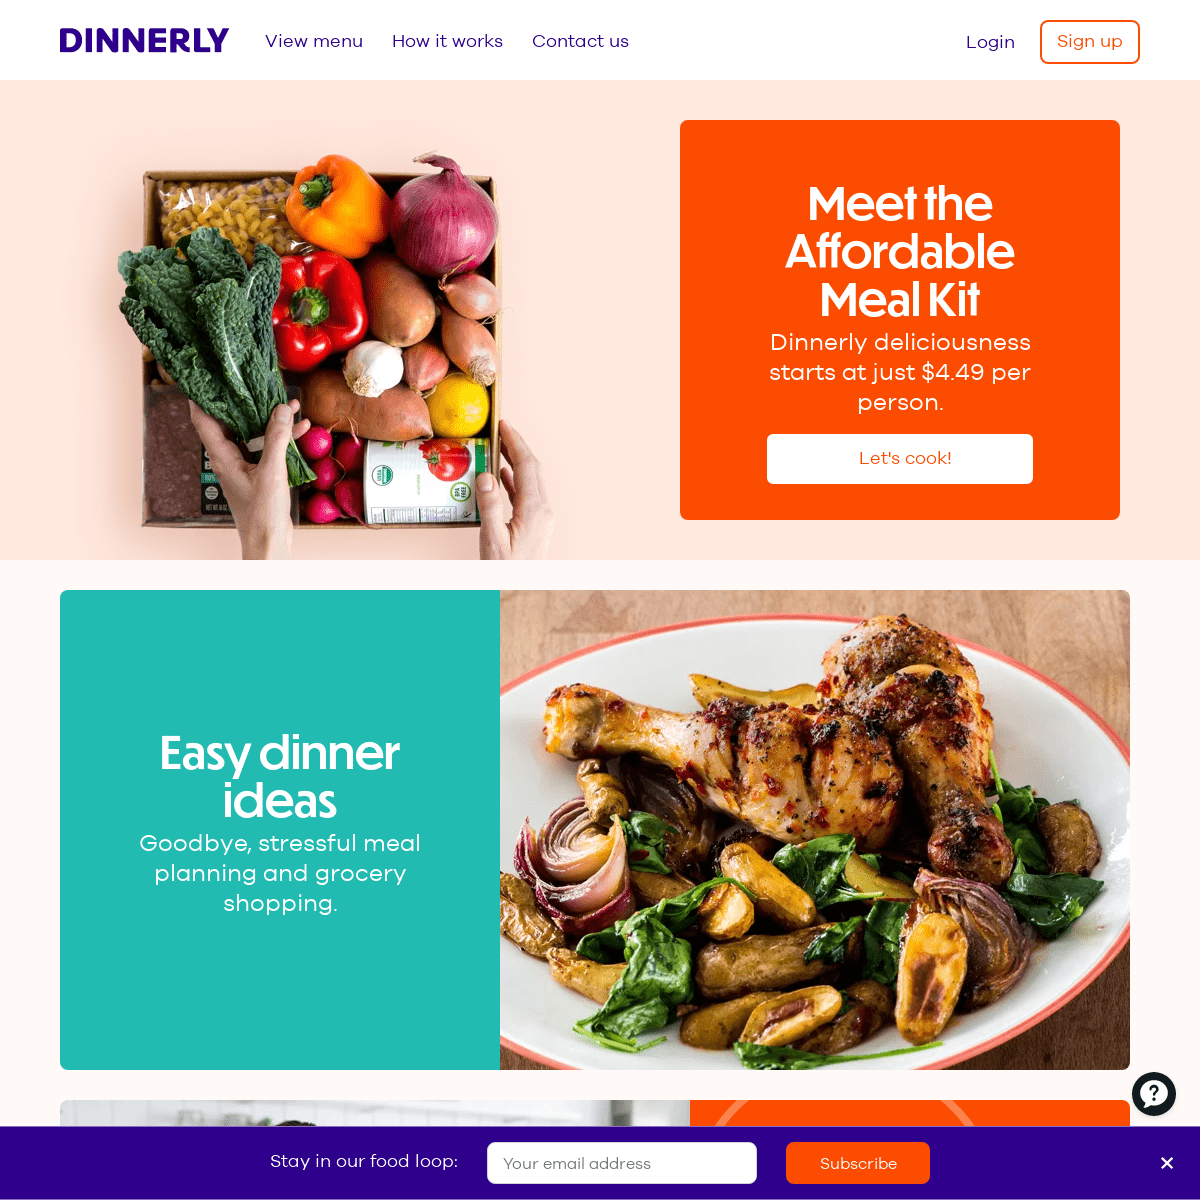 A complete backup of dinnerly.com